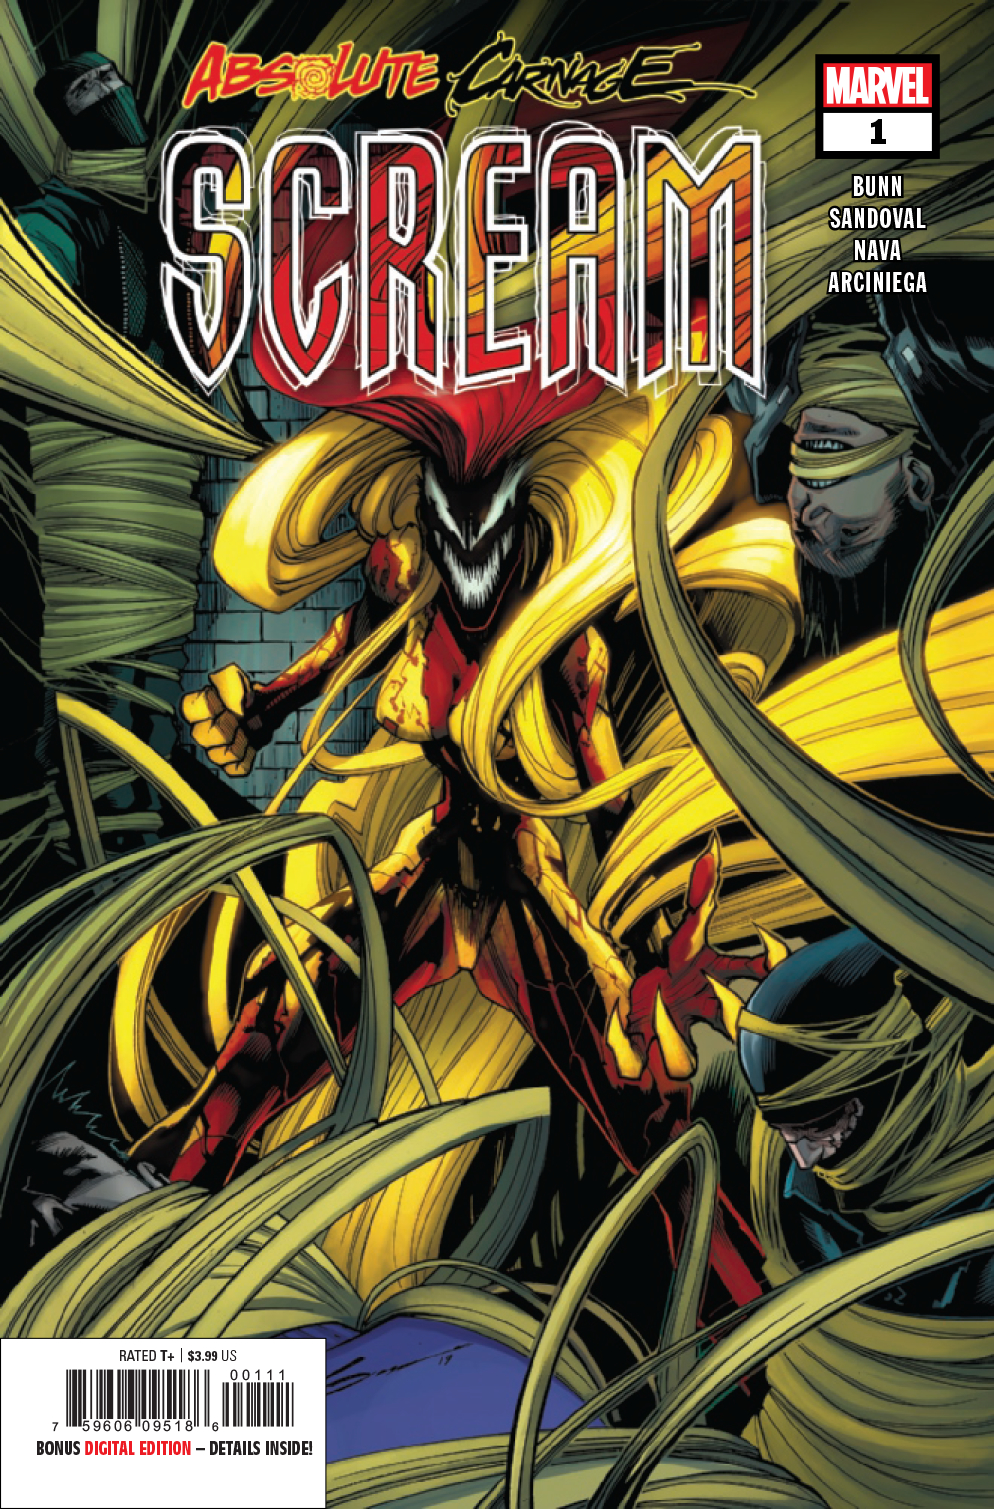 Absolute Carnage: Scream no. 1 (1 of 3) (2019 Series)